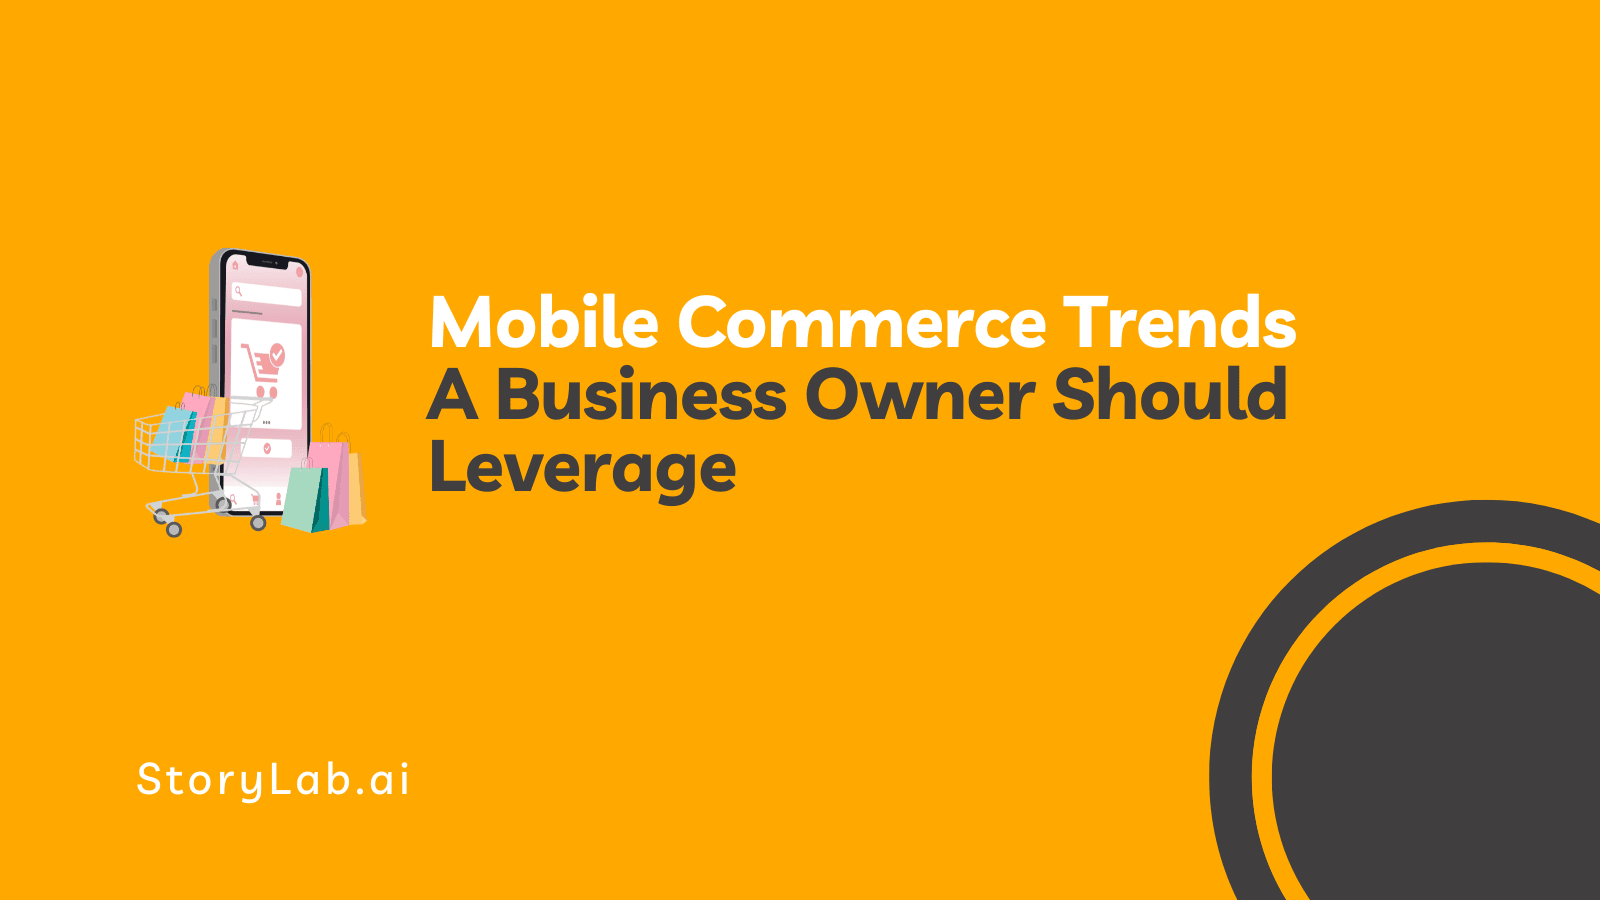 Mobile Commerce Trends A Business Owner Should Leverage